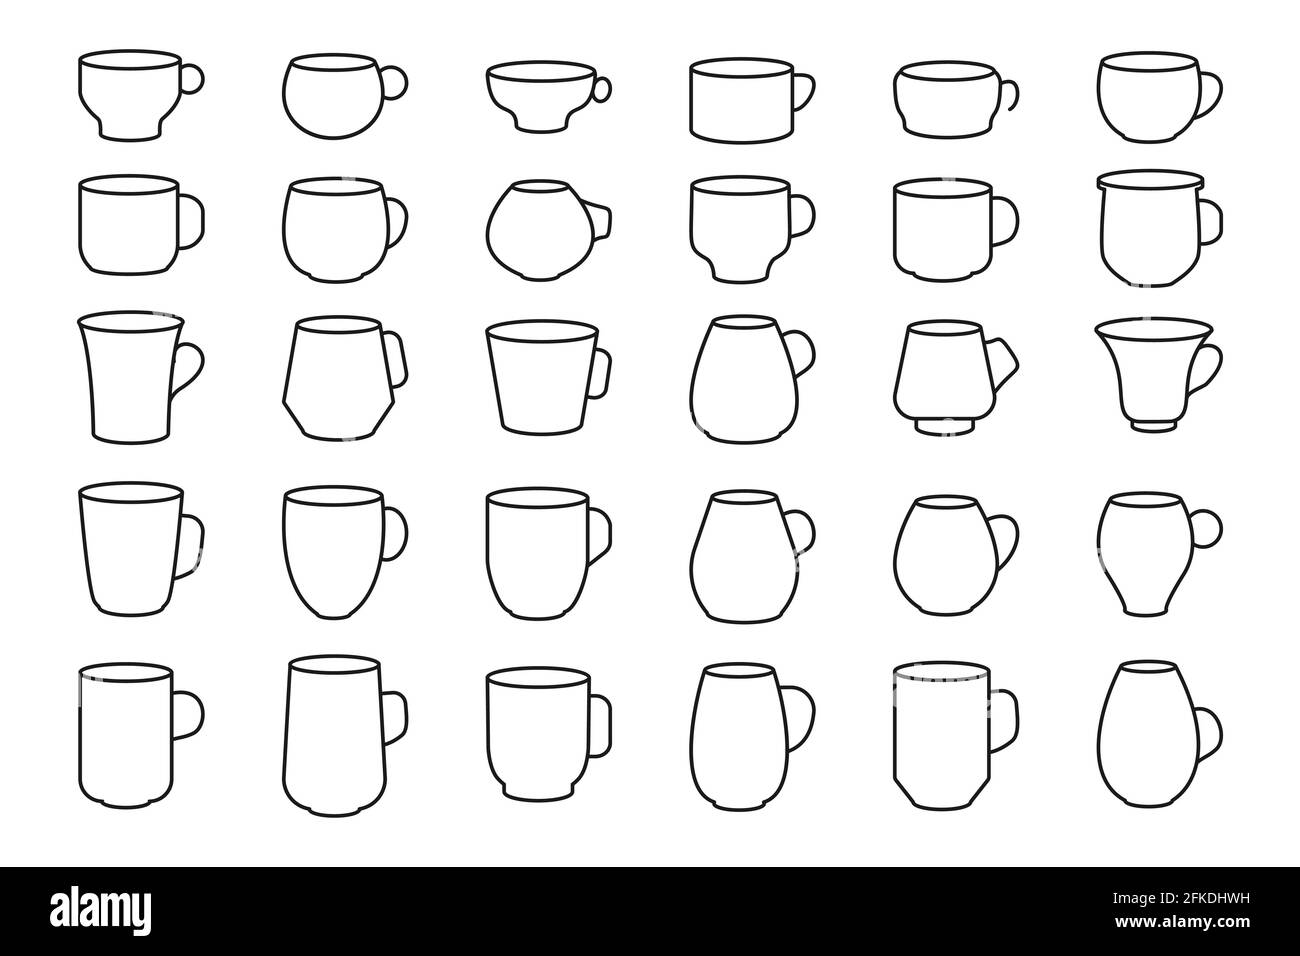 Cup coffee break black outline icon set. Blank linear template different shape for shop, tea house menu. Simple graphic element mug, drink symbol espresso, latte. Isolated on white vector illustration Stock Vector